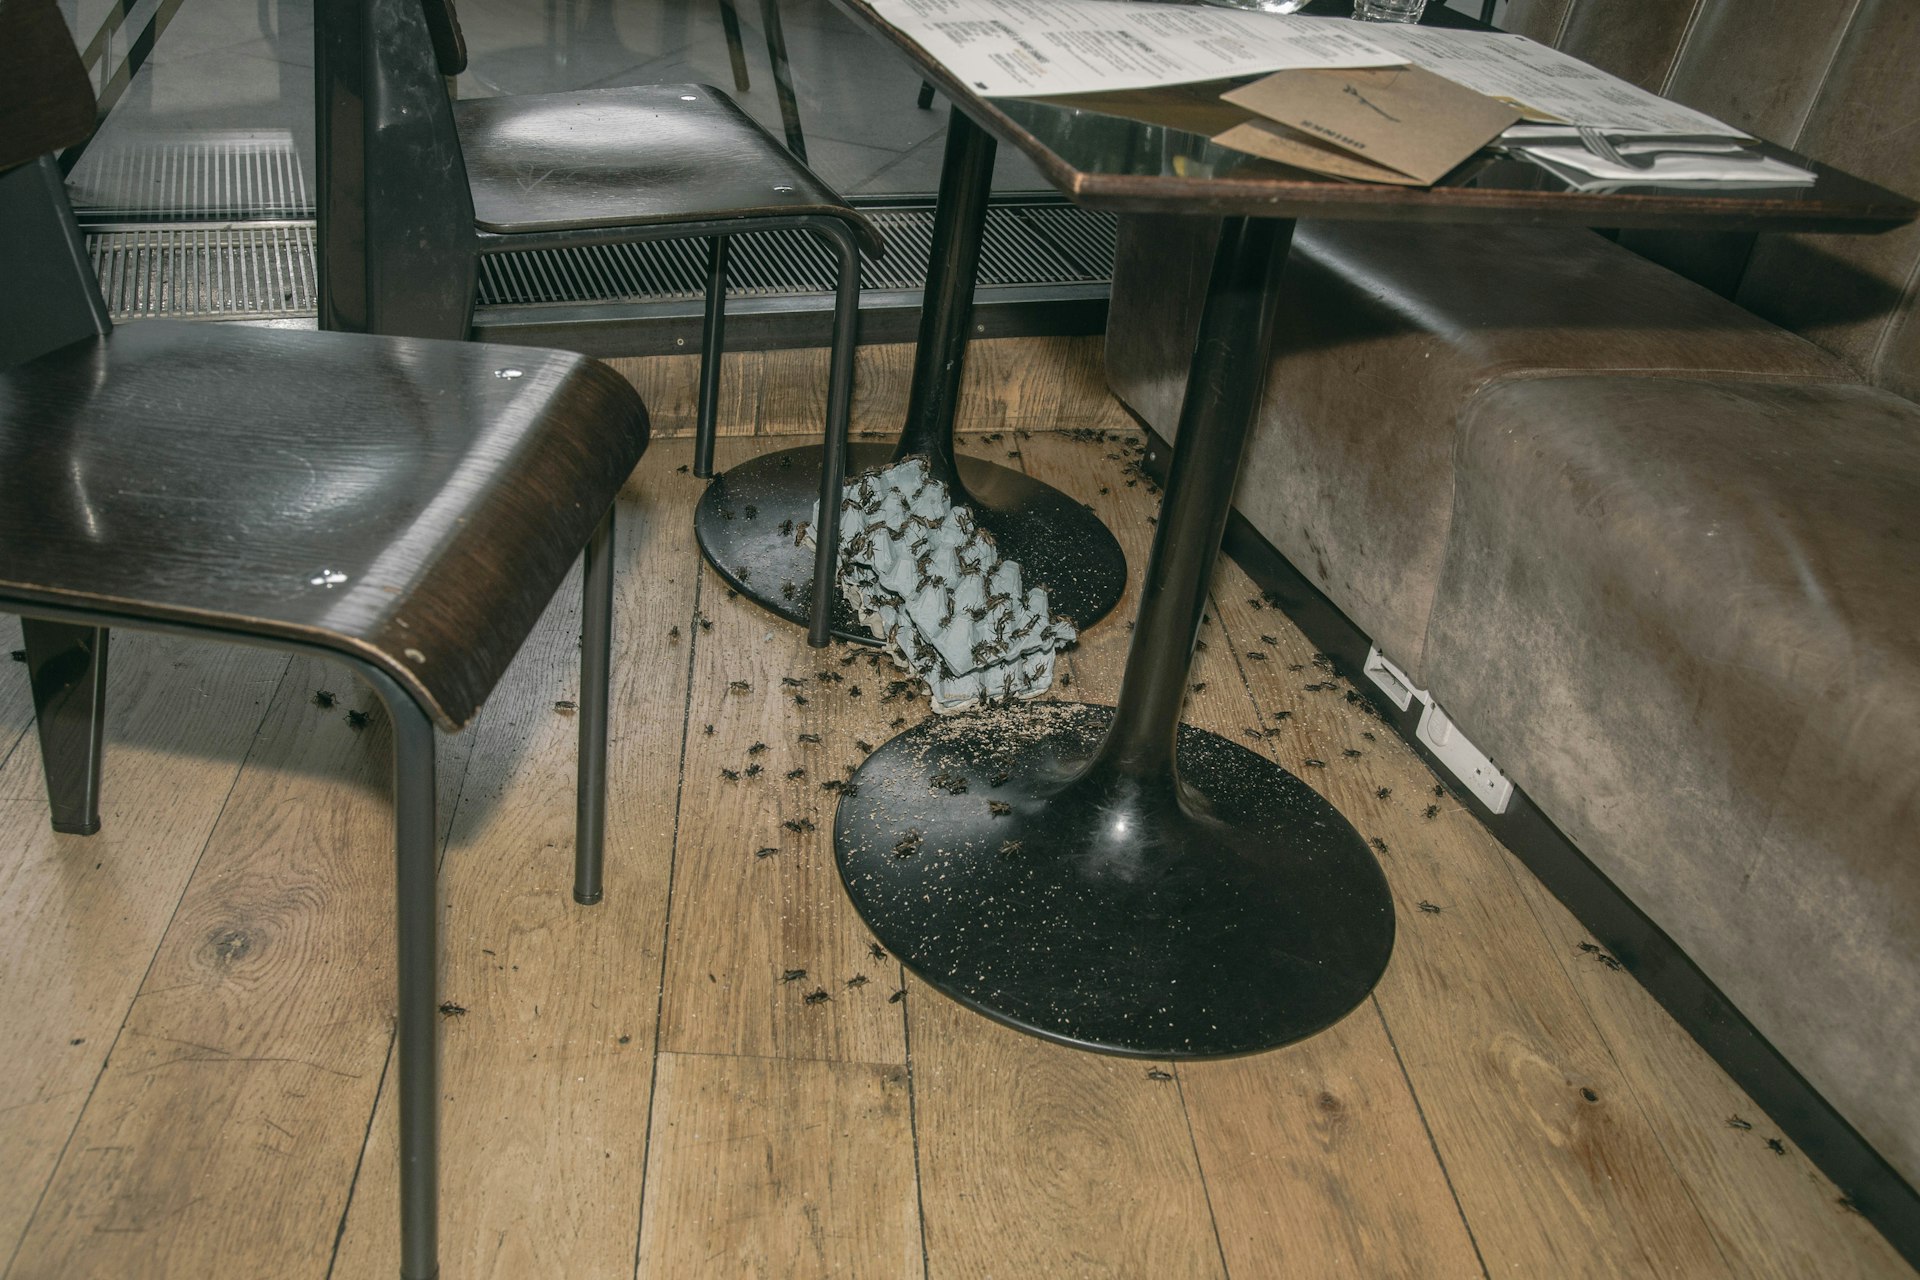 We watched angry activists release thousands of bugs in a busy London restaurant